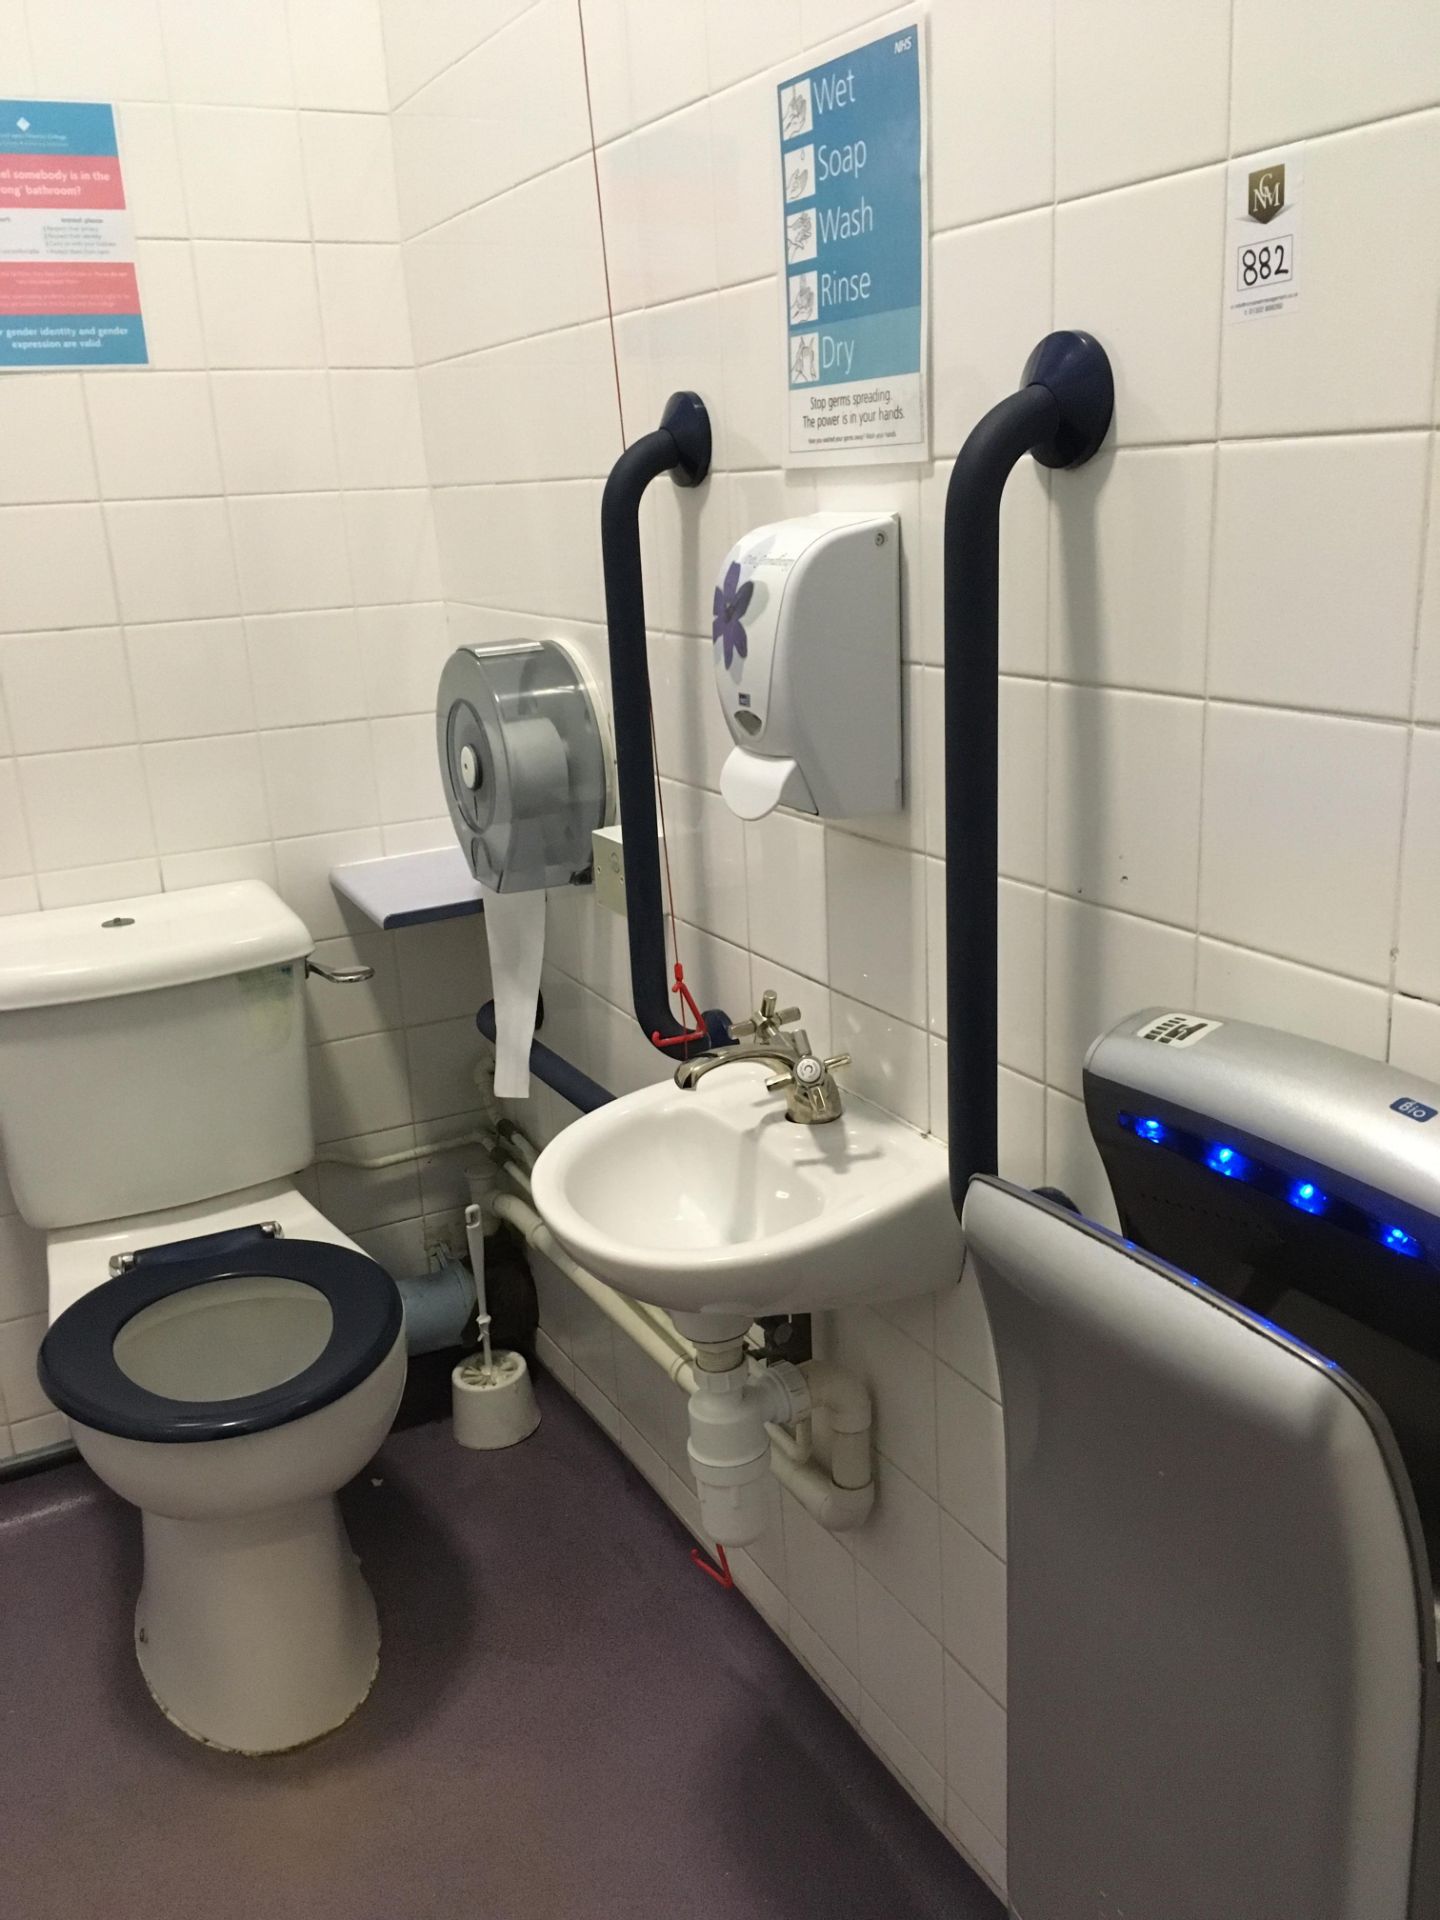 Contents of the disabled toilet, 1 x cubicle, hand drier, mirror, safety rails